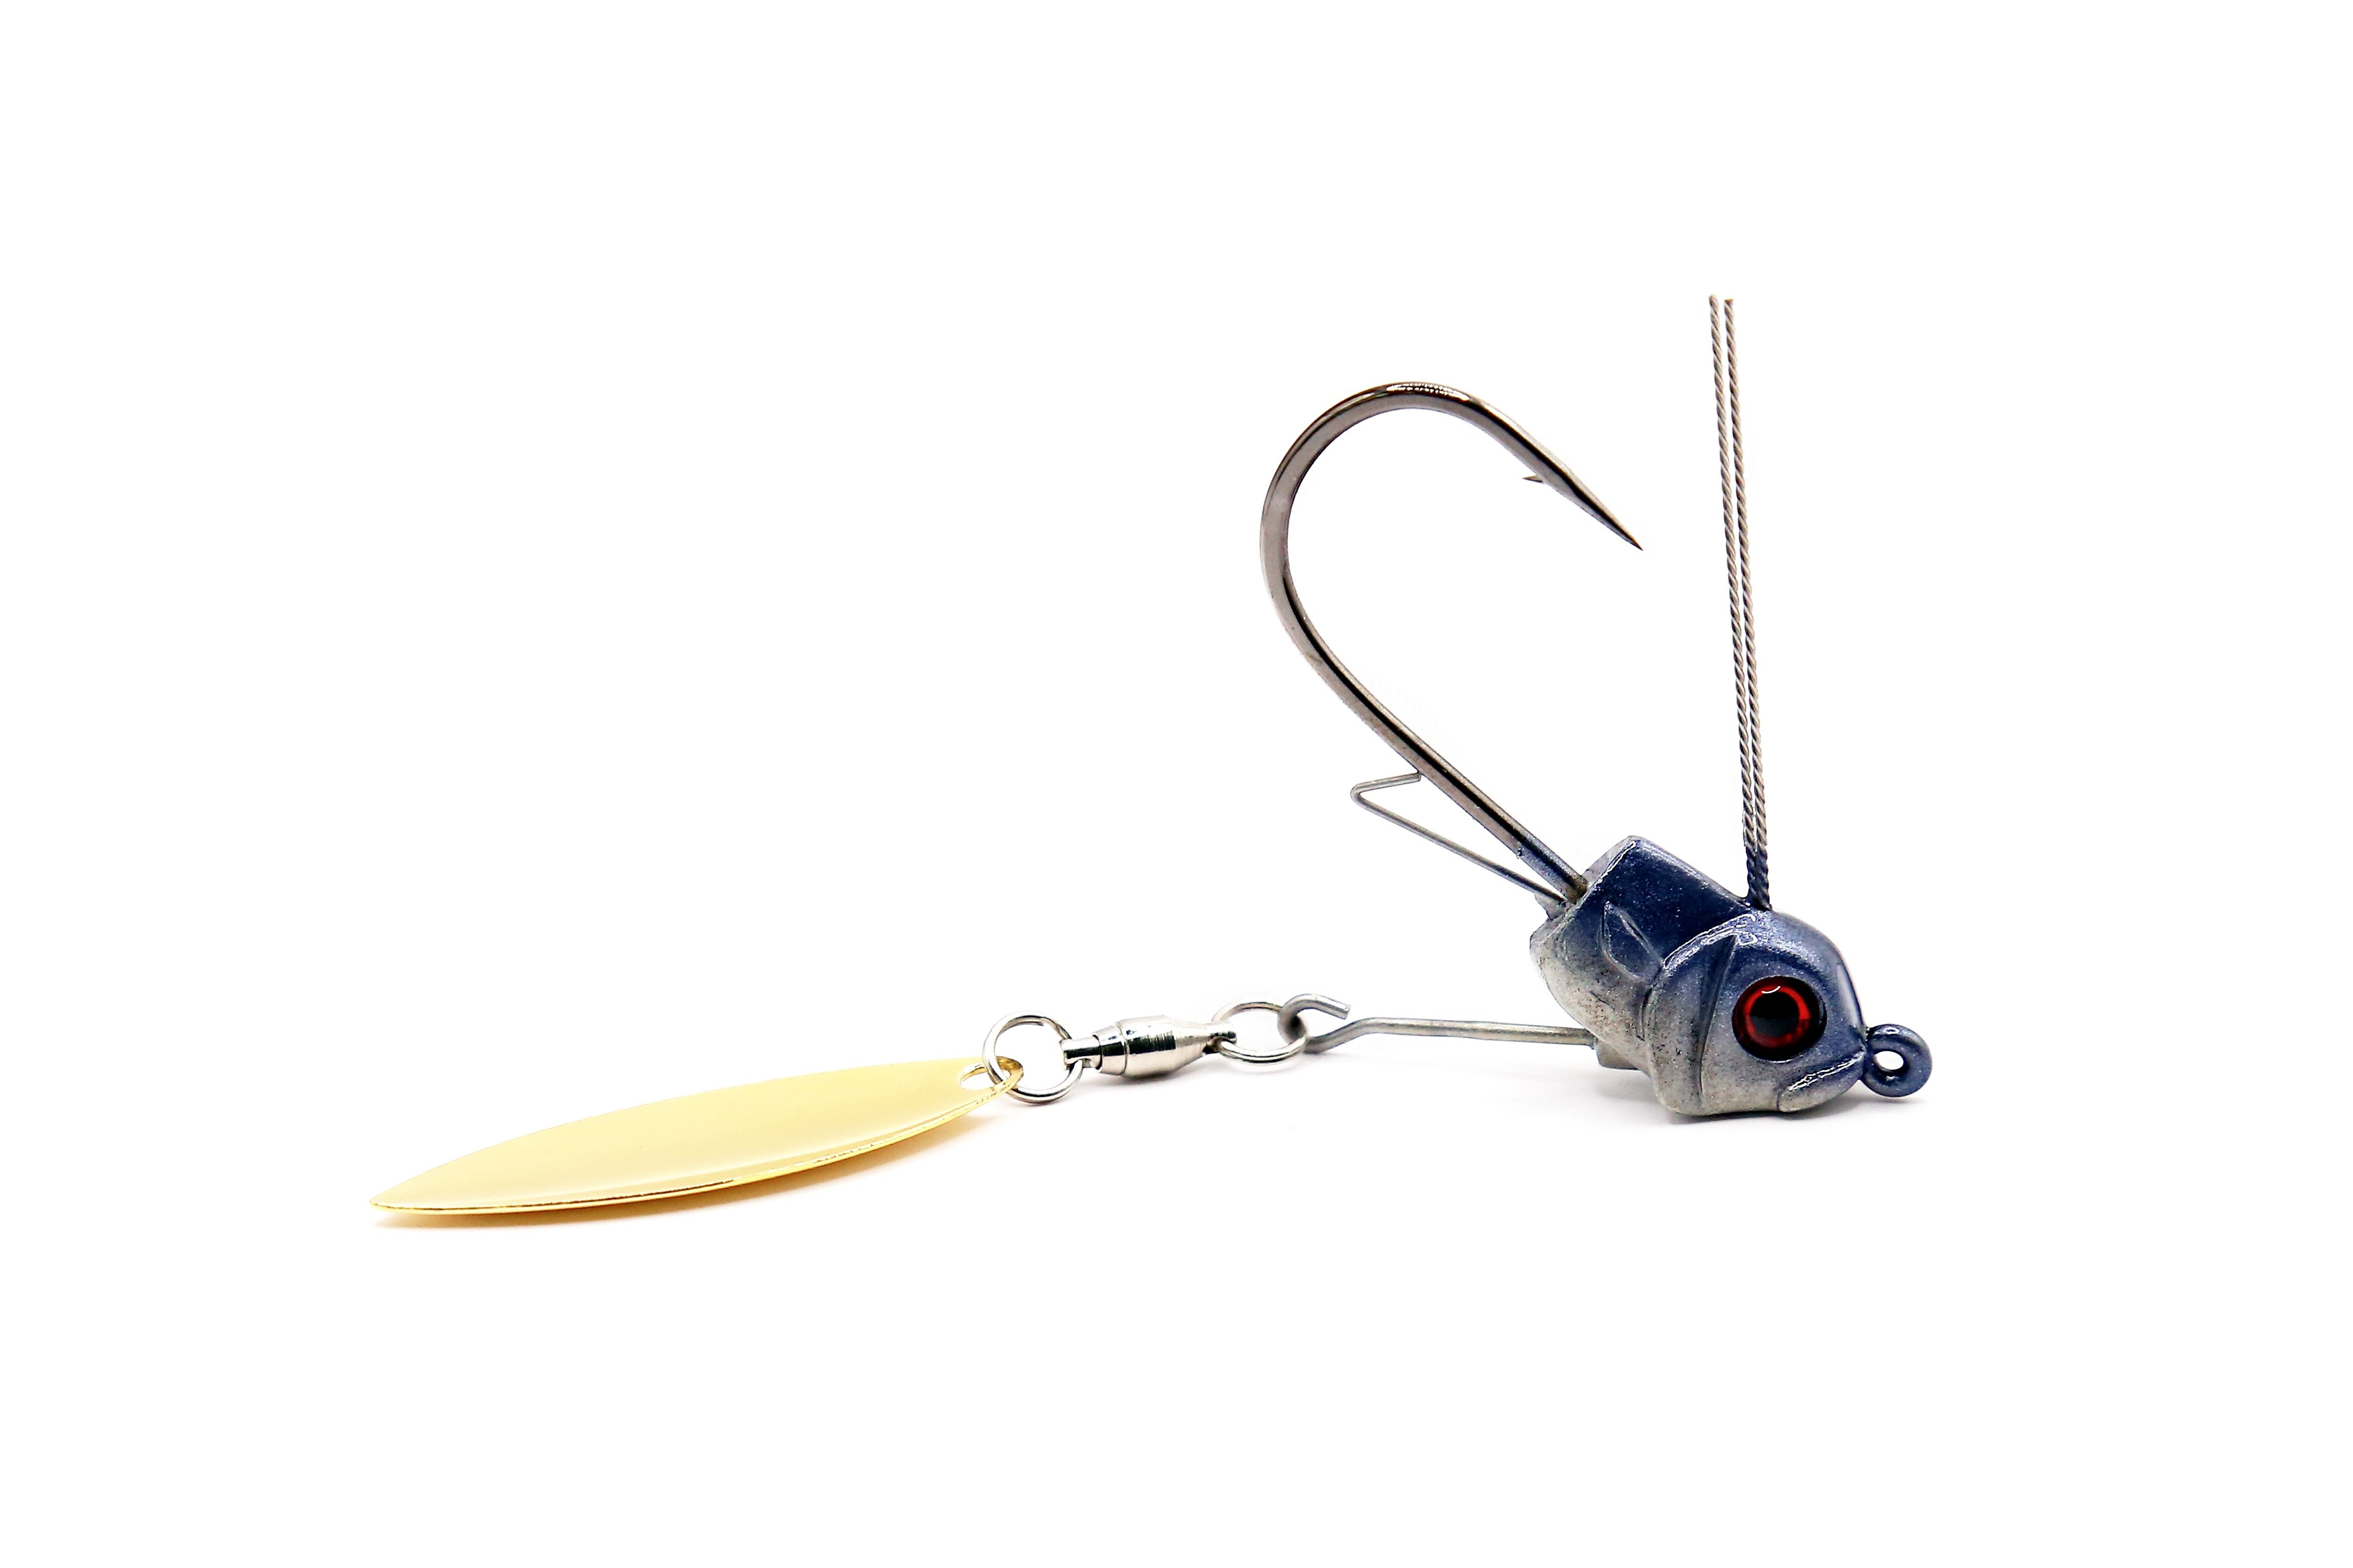 WARBAITS UNDERSPIN UNDER SPIN WEEDLESS WEEDGUARD SPOTTED CALICO